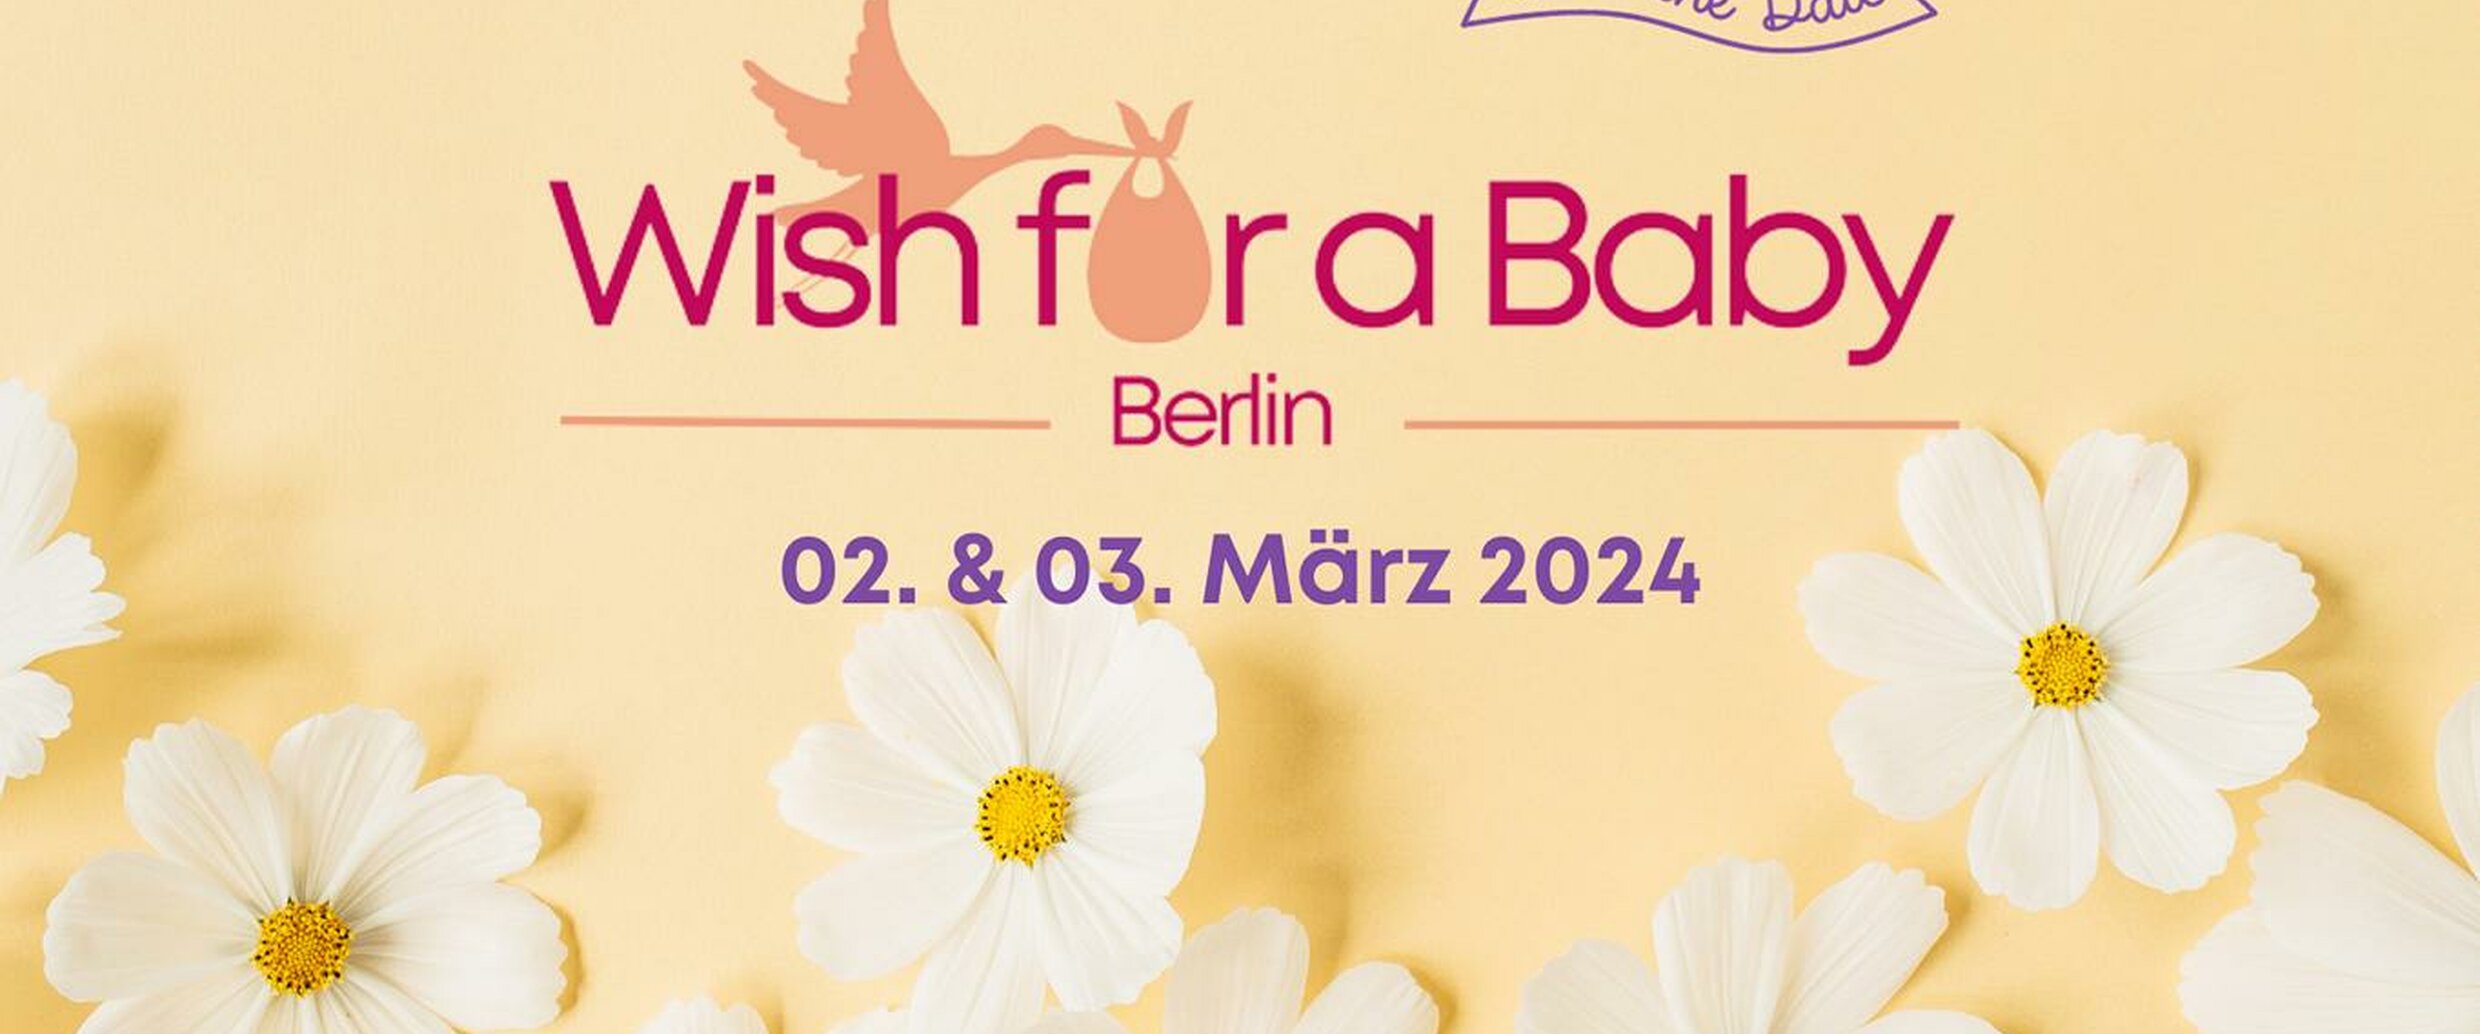 Wish for a Baby Berlin